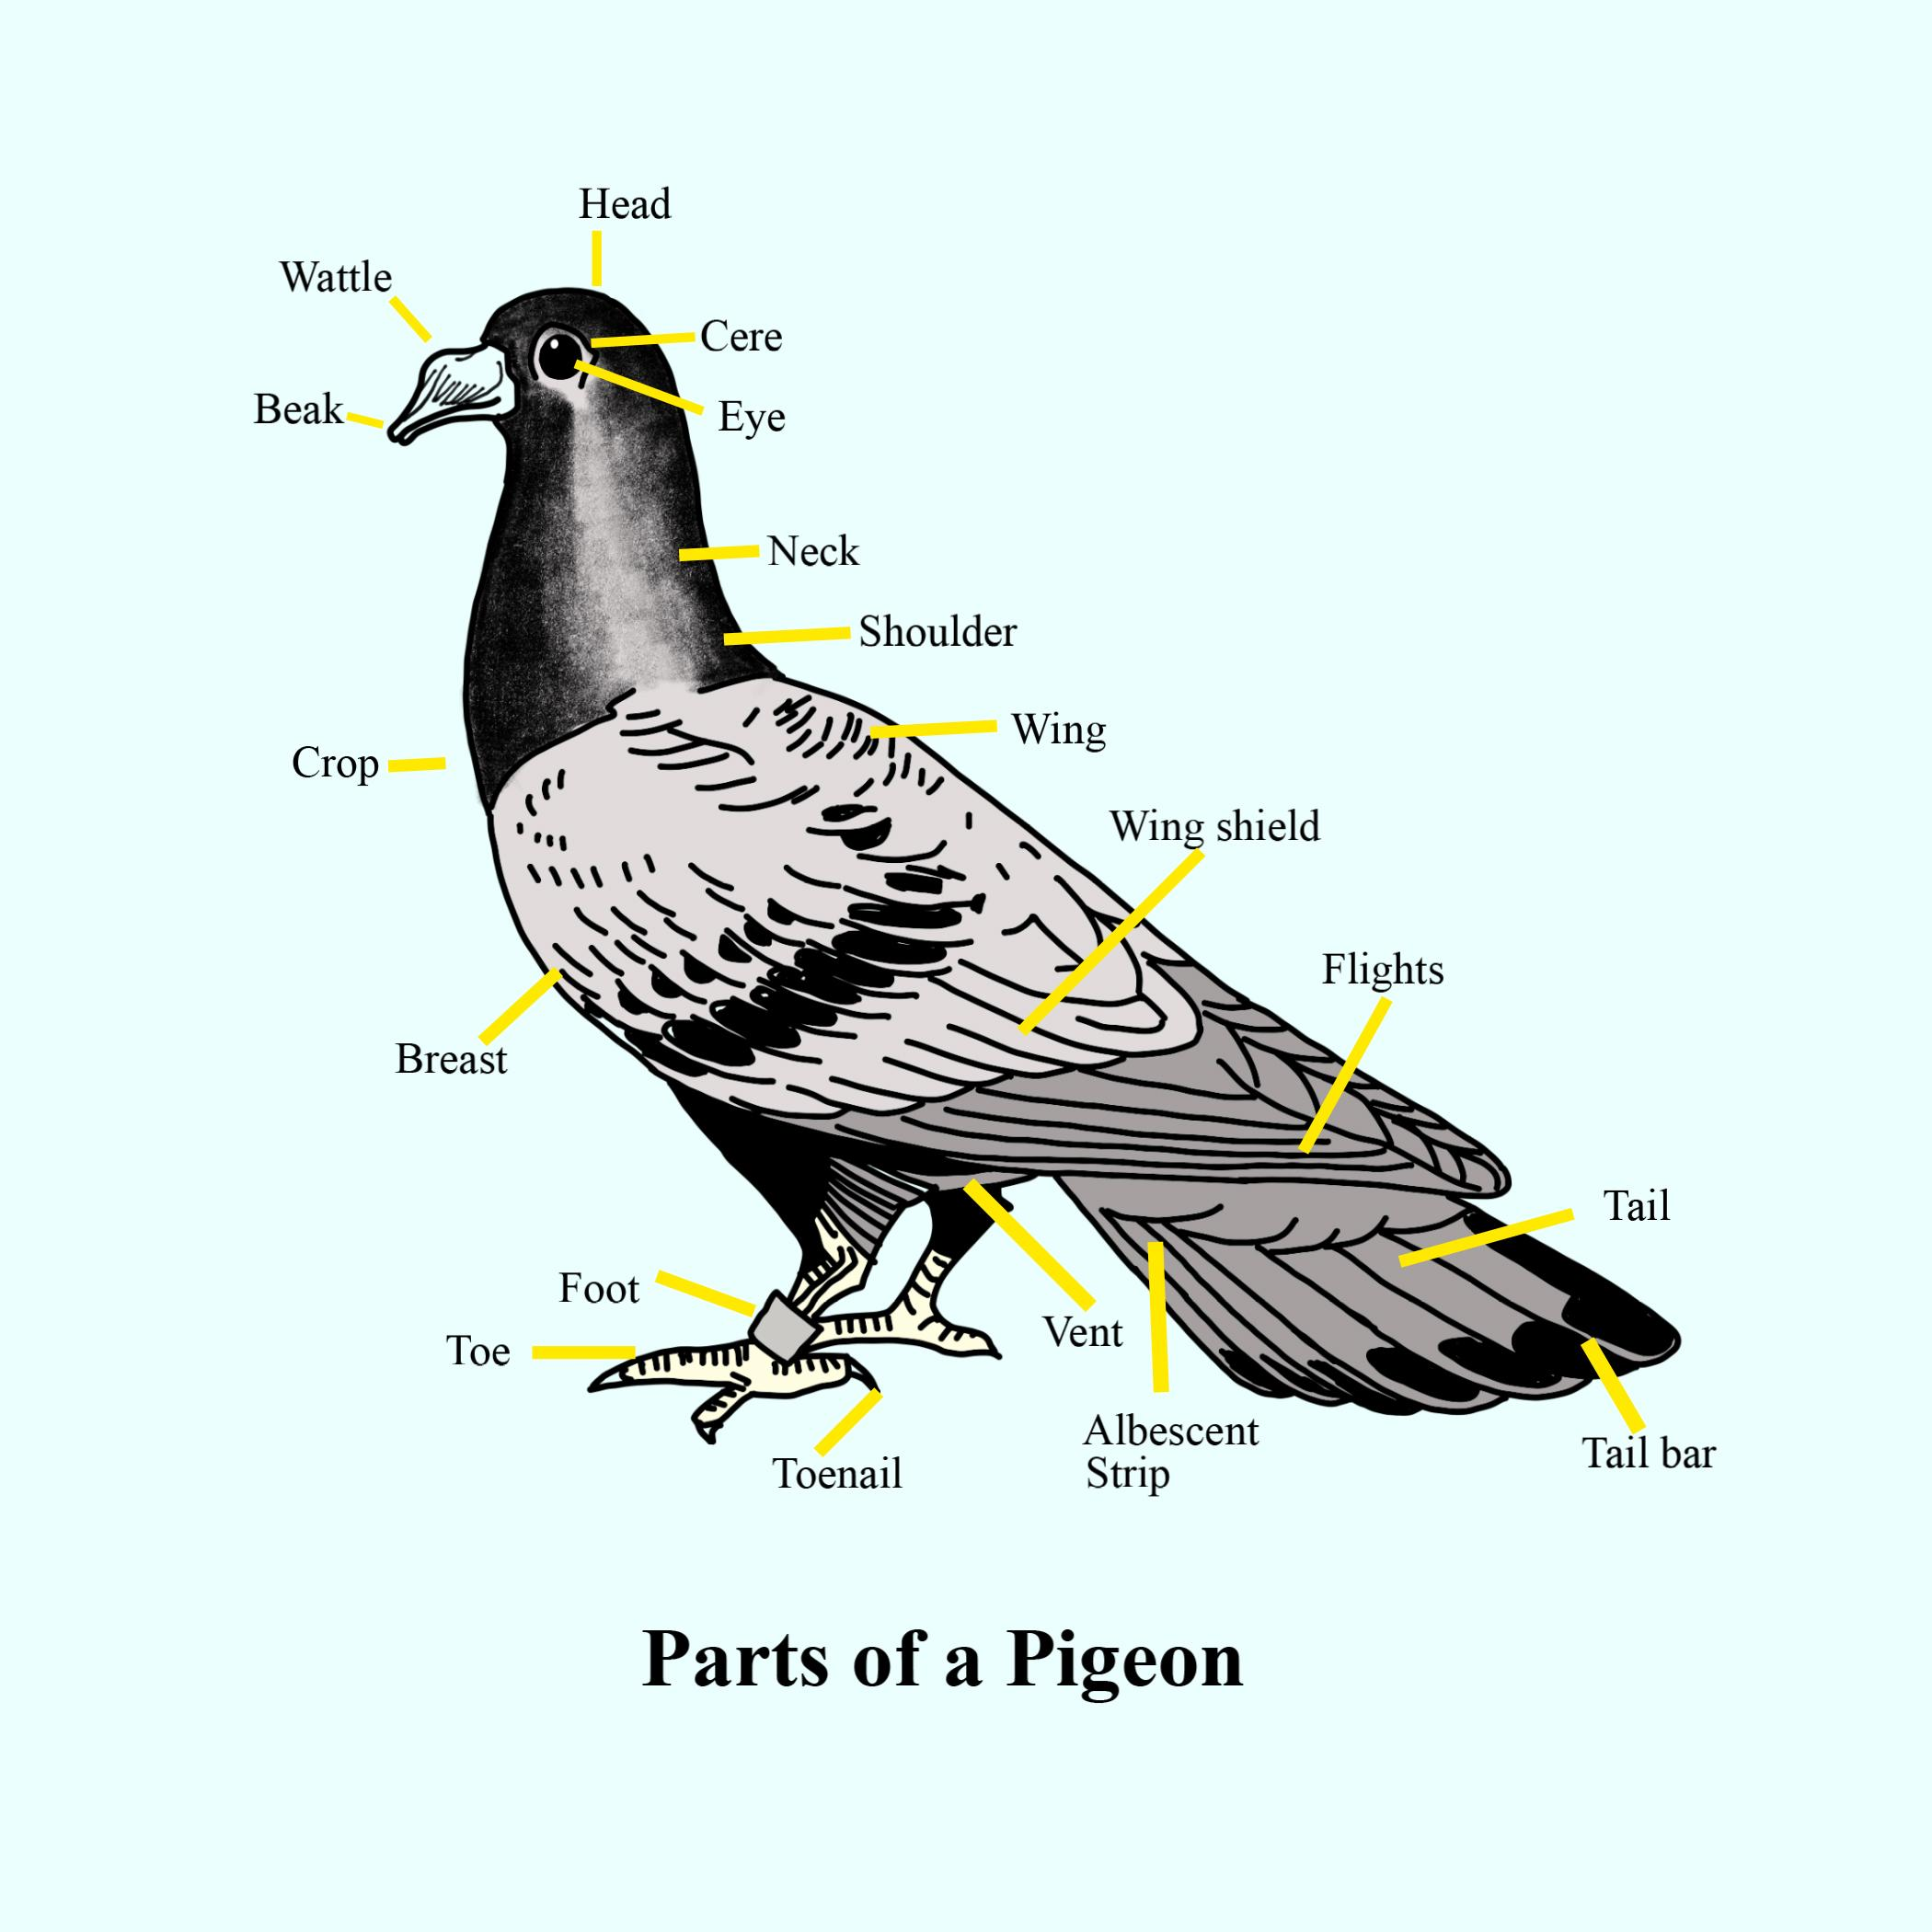 sketch-label-and-classify-pigeon